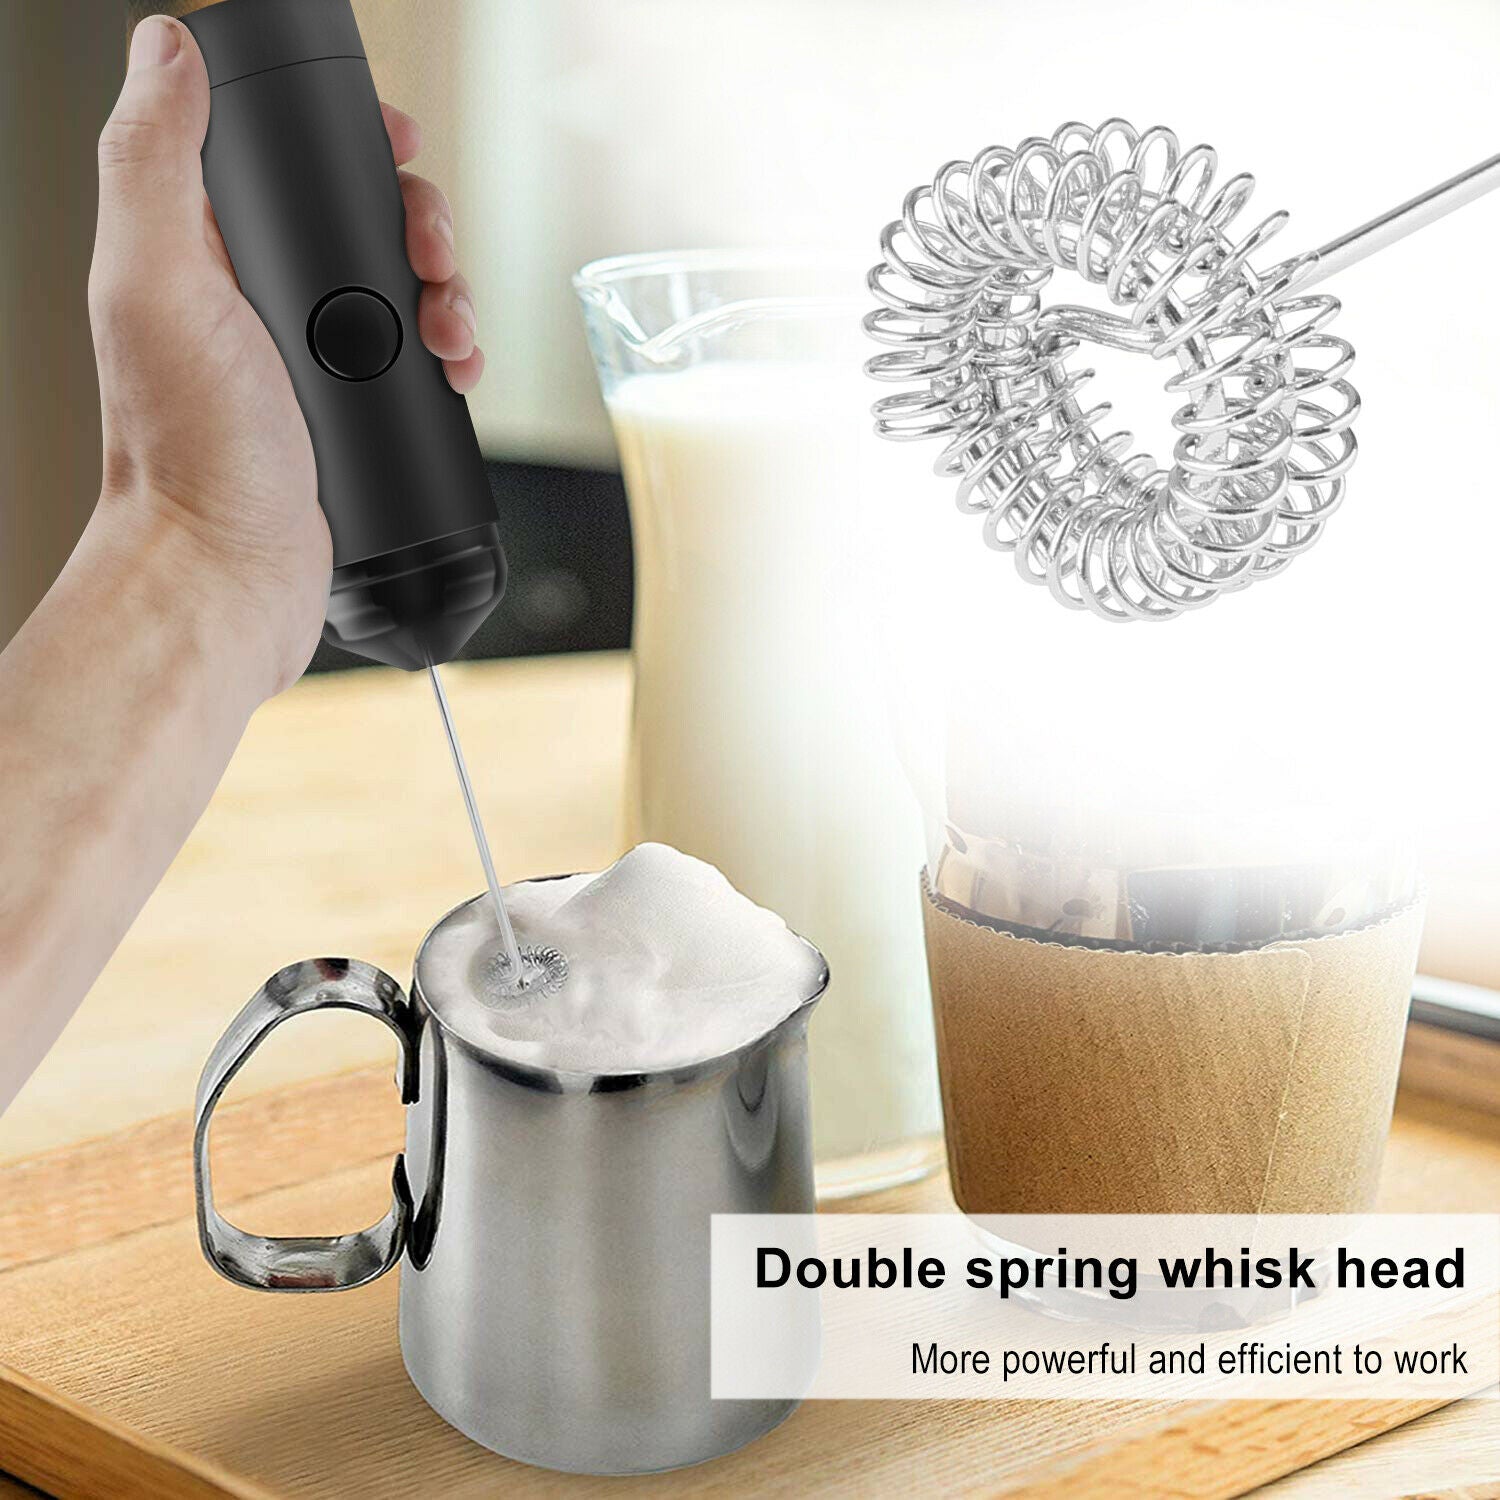 Electric Milk Frother Automatic Handheld Foam Coffee Maker Egg